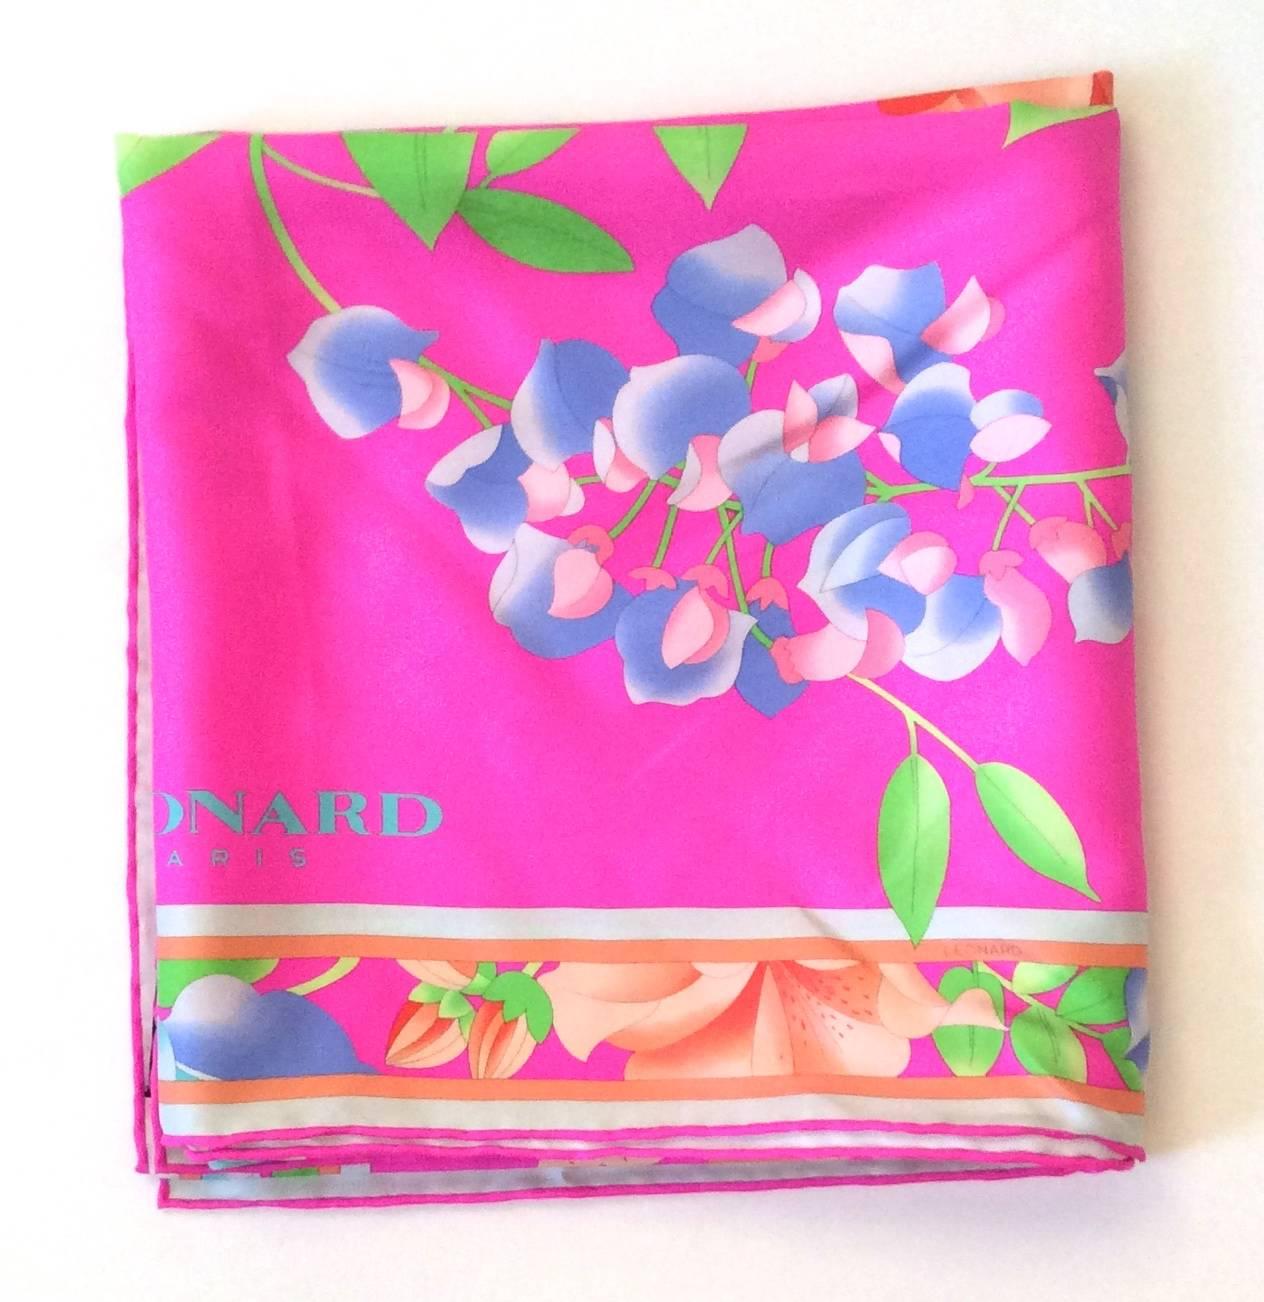 Presented here is a silk from Leonard. The scarf is comprised of a vibrant bright magenta background. In the foregrounded of the scarf, there are bright colored flowers comprised of shades of blue, red, green, and pink. There are brightly colored